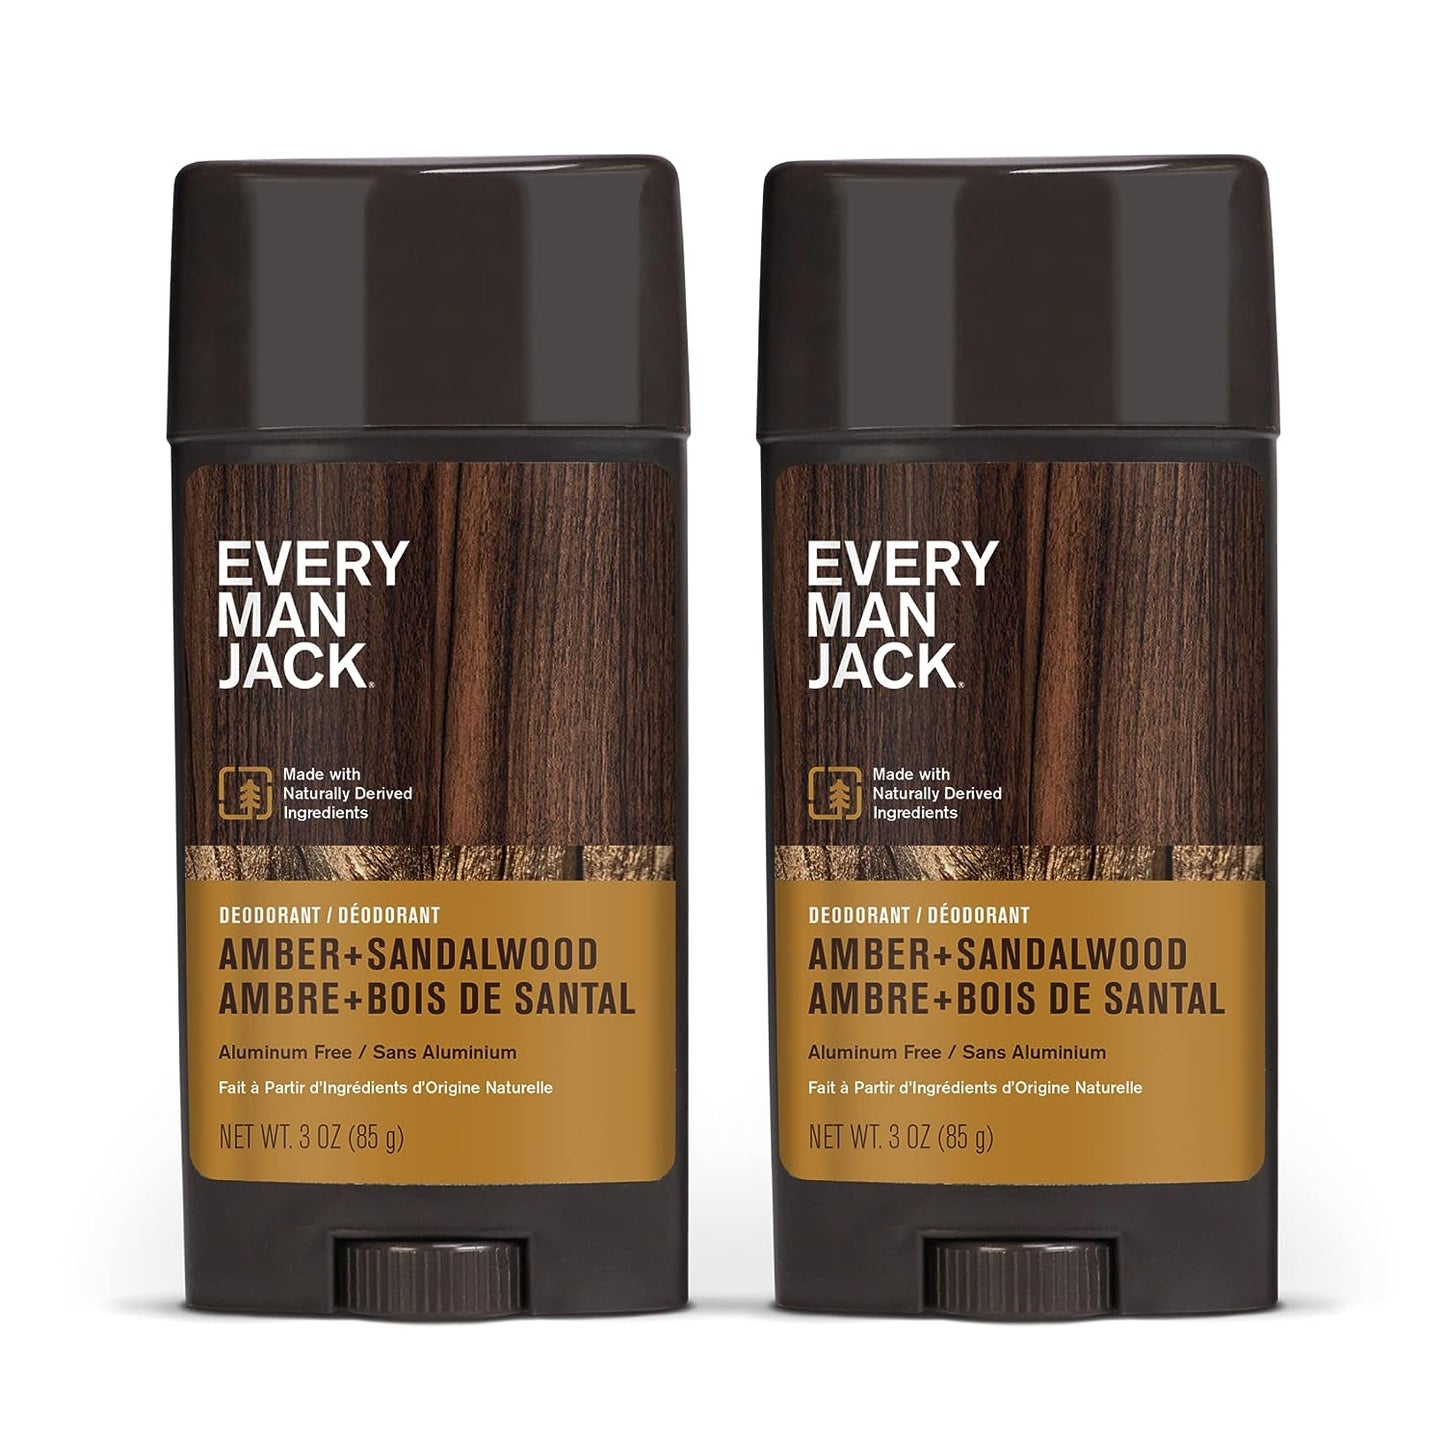 Every Man Jack Amber Deodorant + Sandalwood Men’s Scent. Stay Fresh with Aluminum Free Deodorant for all Skin types